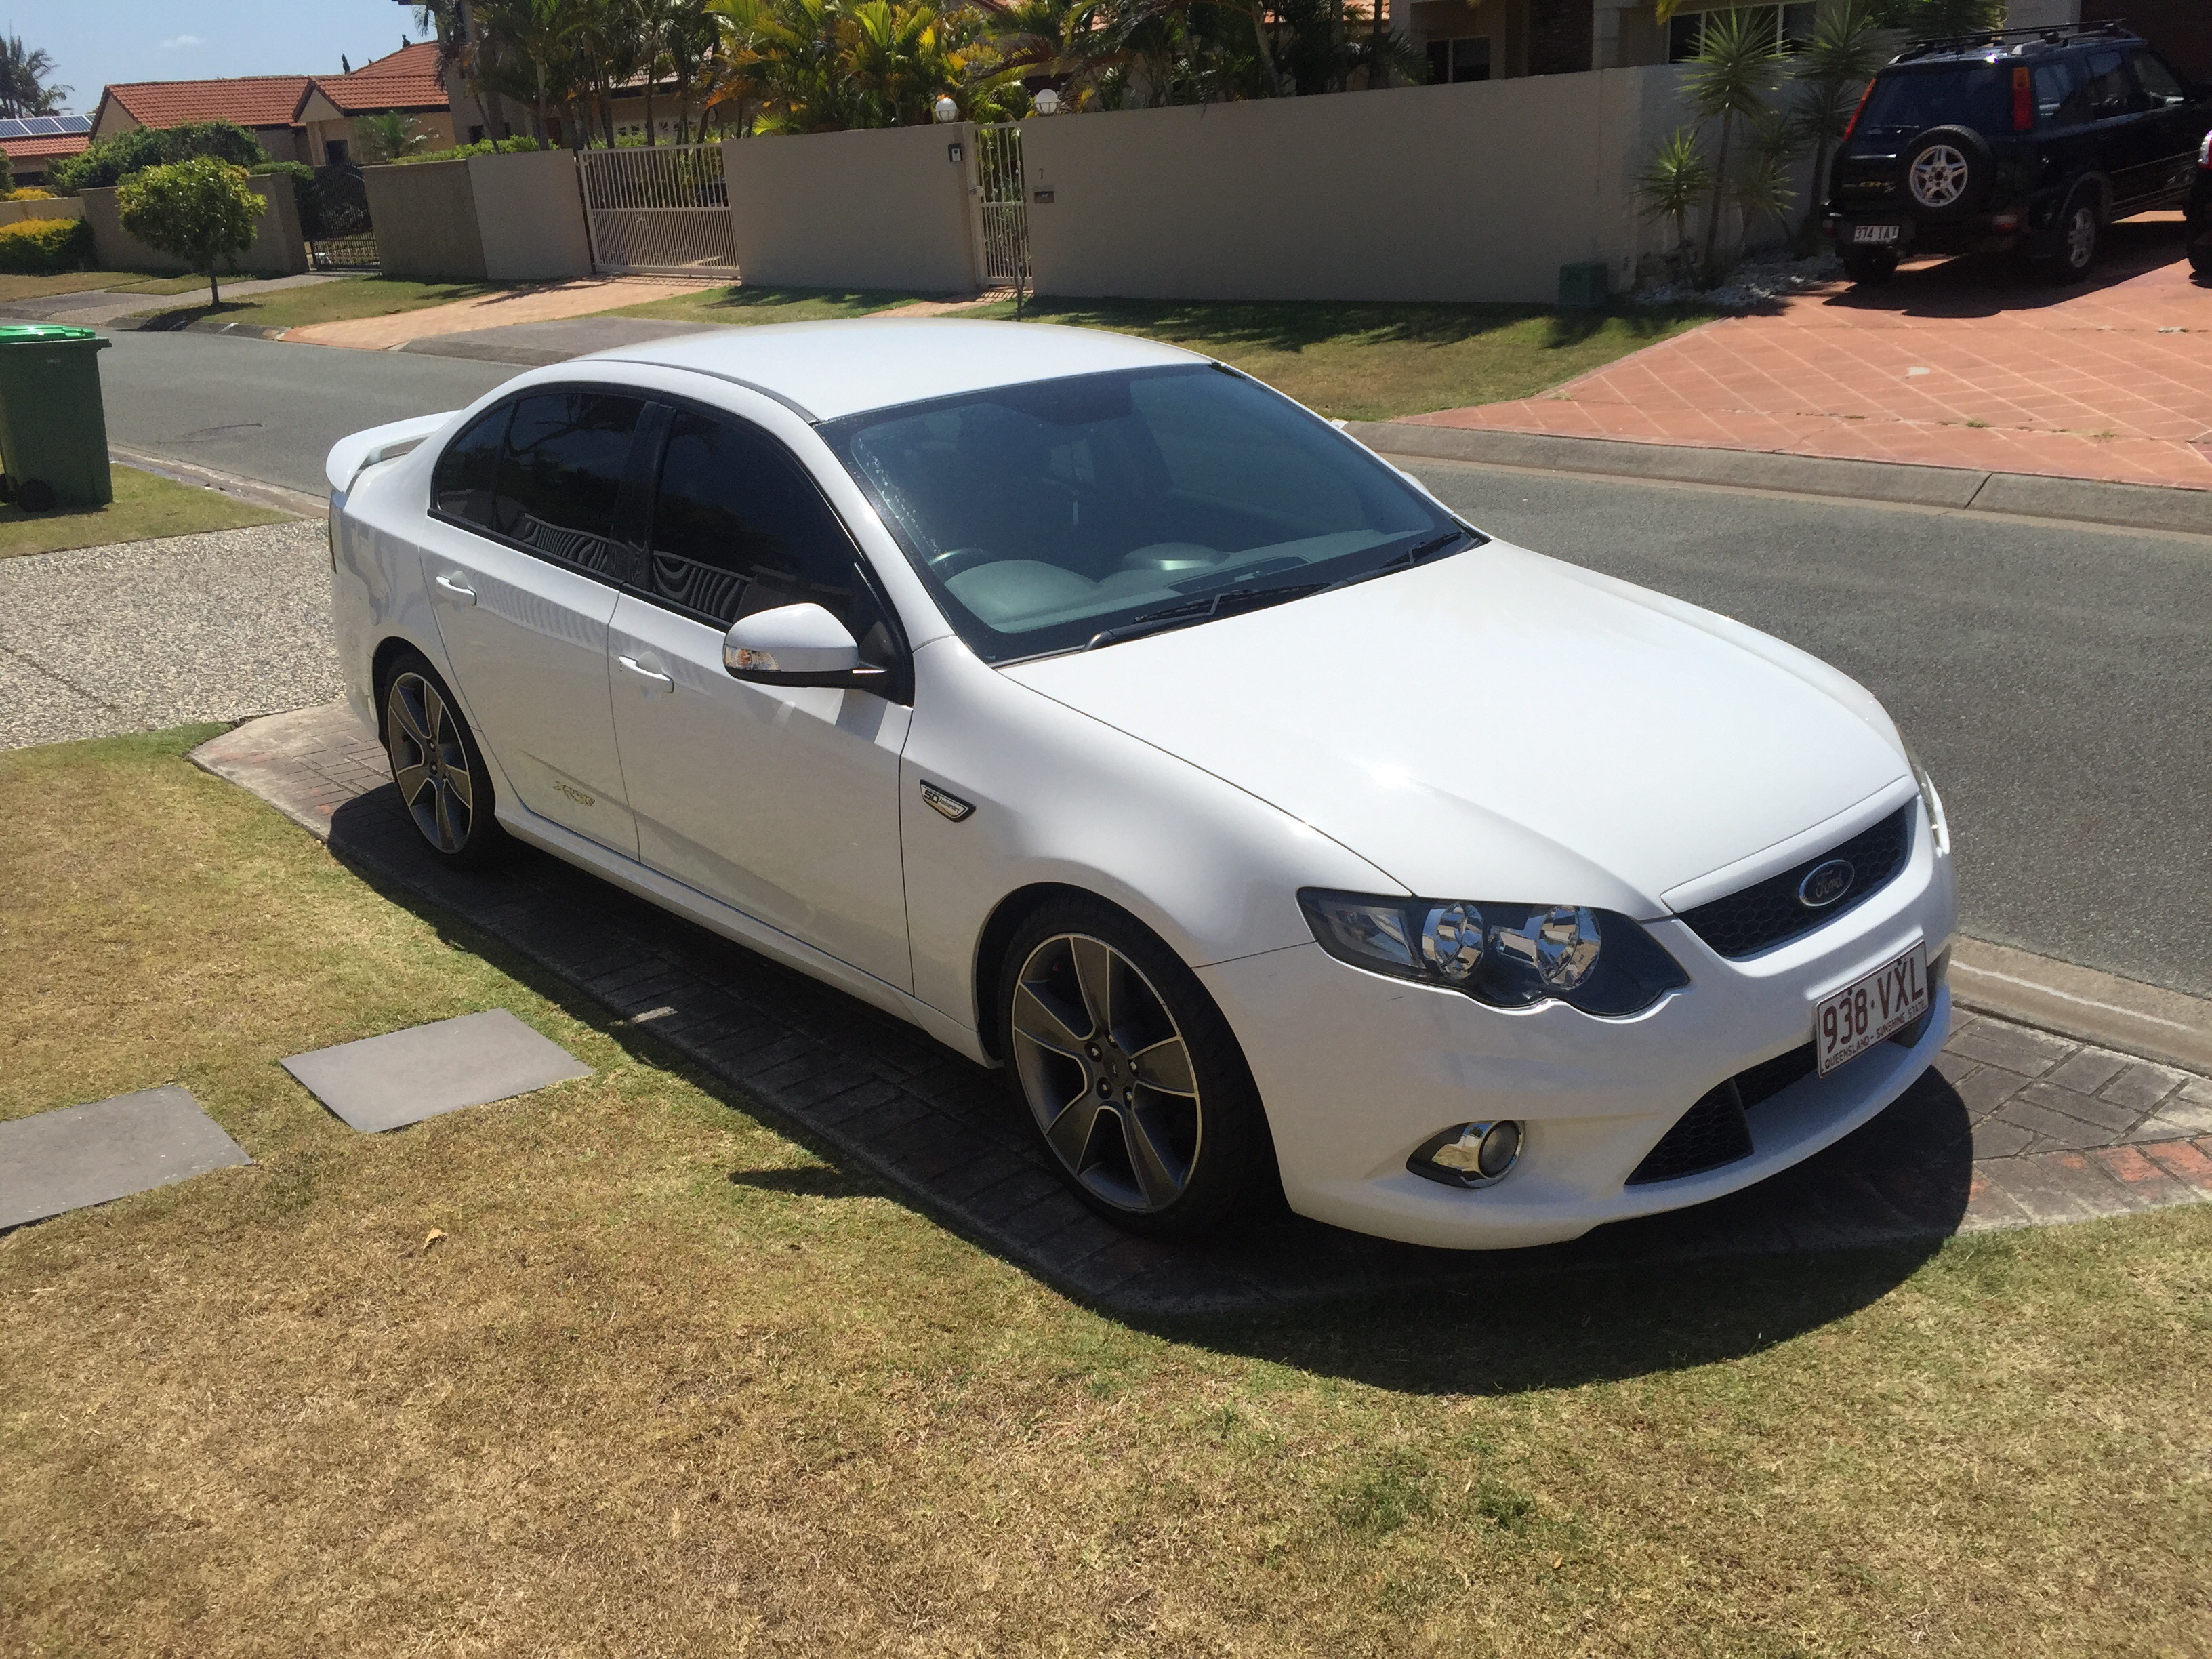 Ford xr6t upgrades #9